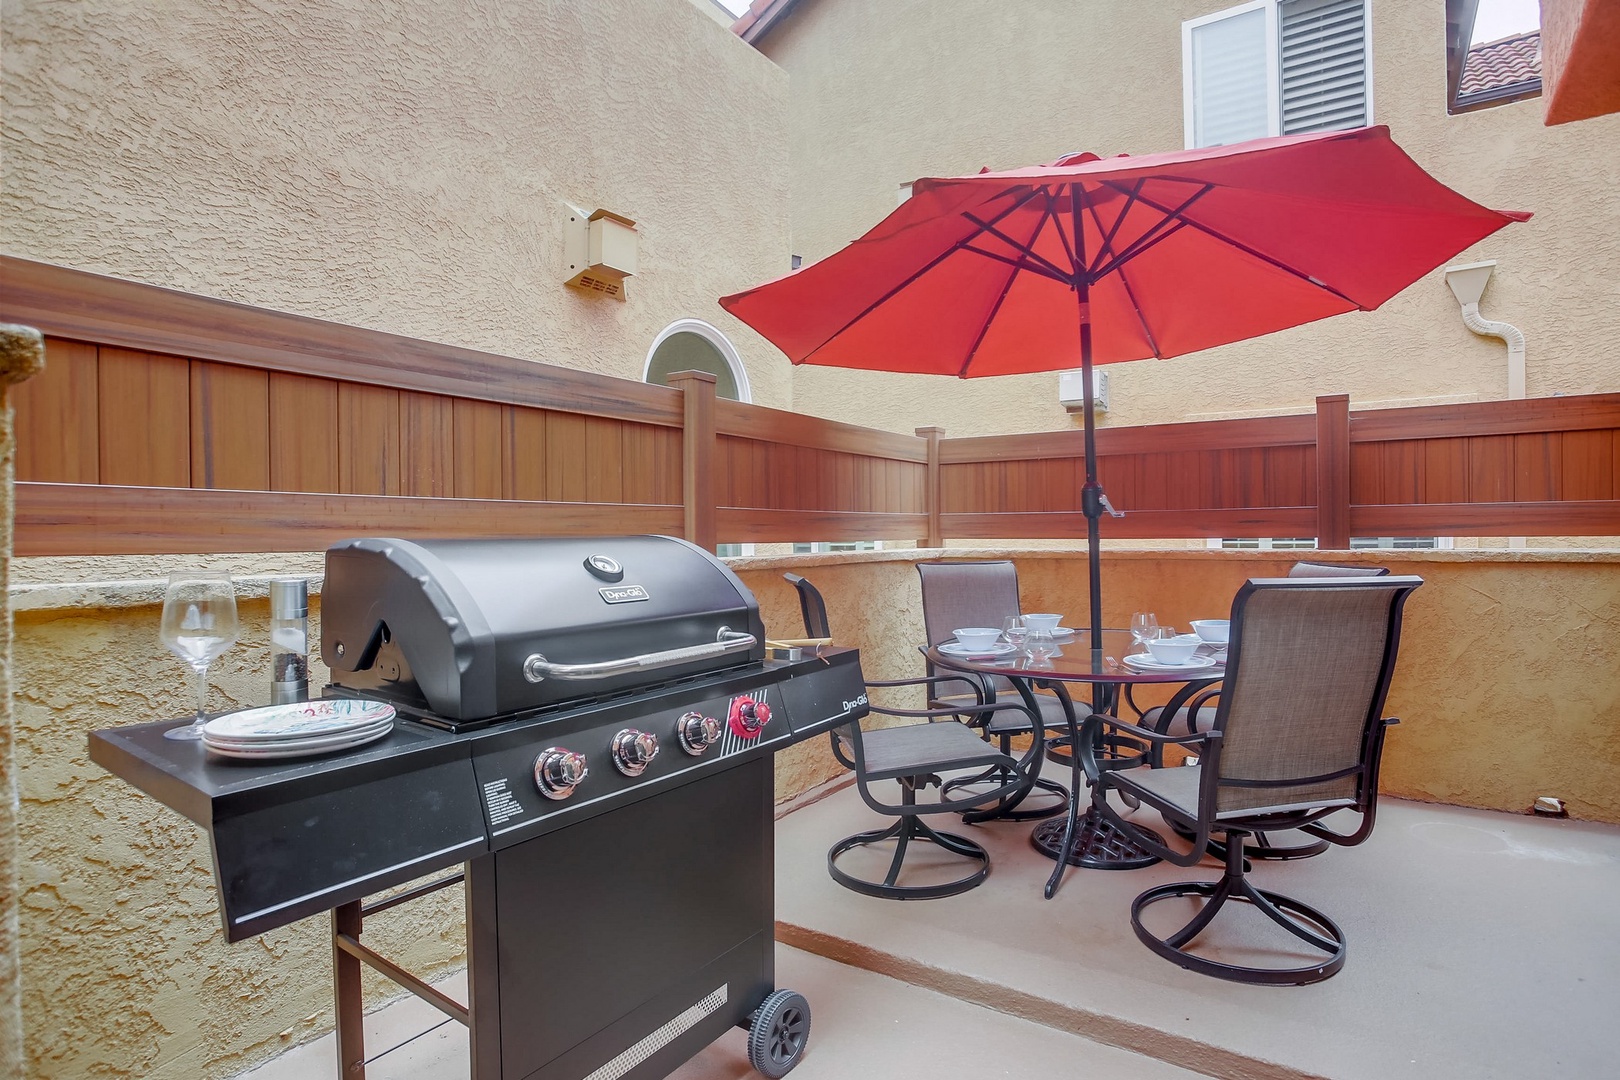 Private patio with bar-b-que